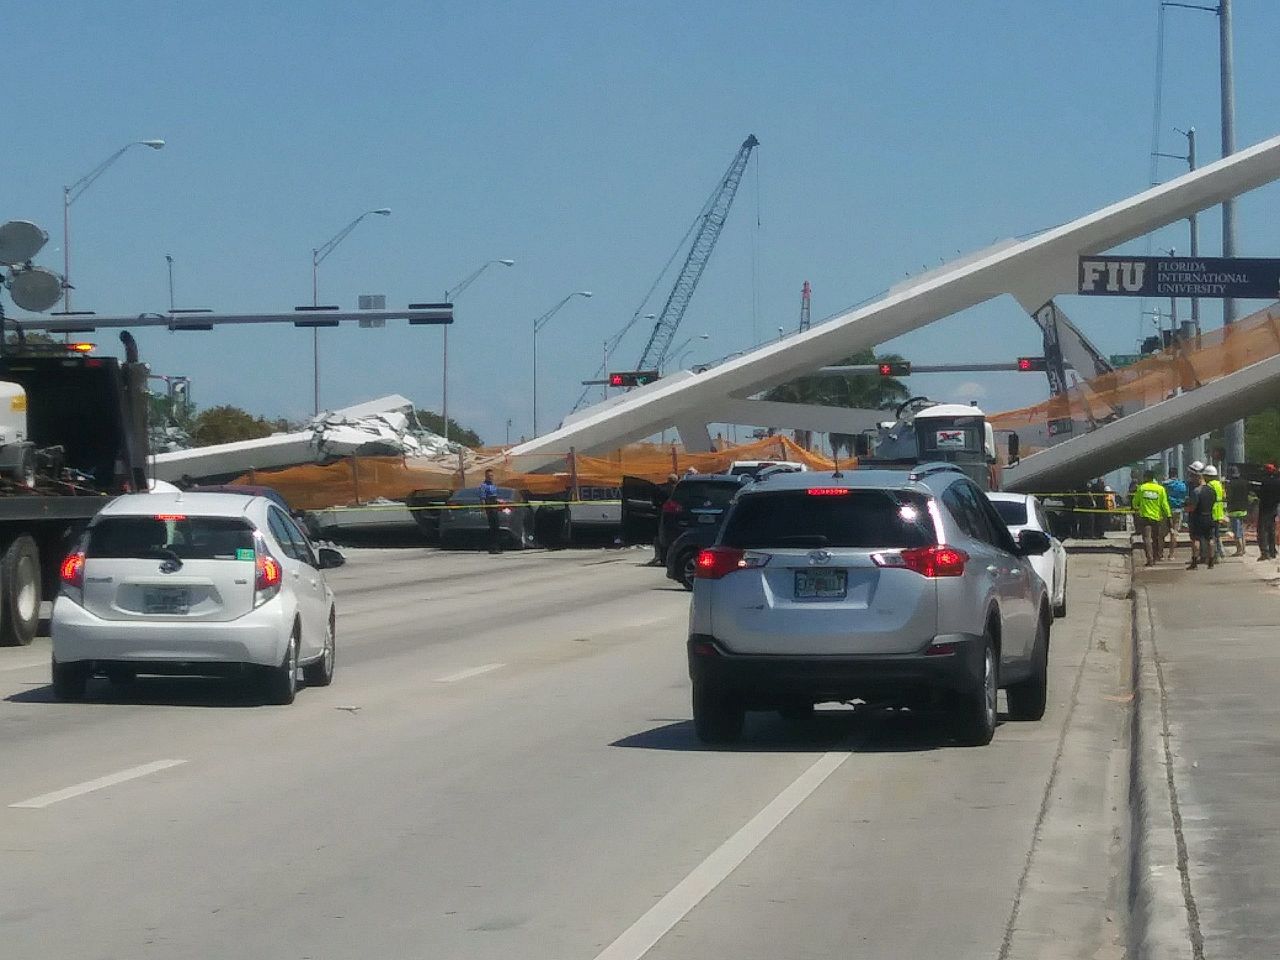 Candace Pridemore took this photo of the collapsed bridge. "I was sitting in a truck," she said. "We were pulled over to the side working. I looked over and there was a bridge coming down. I started screaming, 'It's going, it's going down.'"